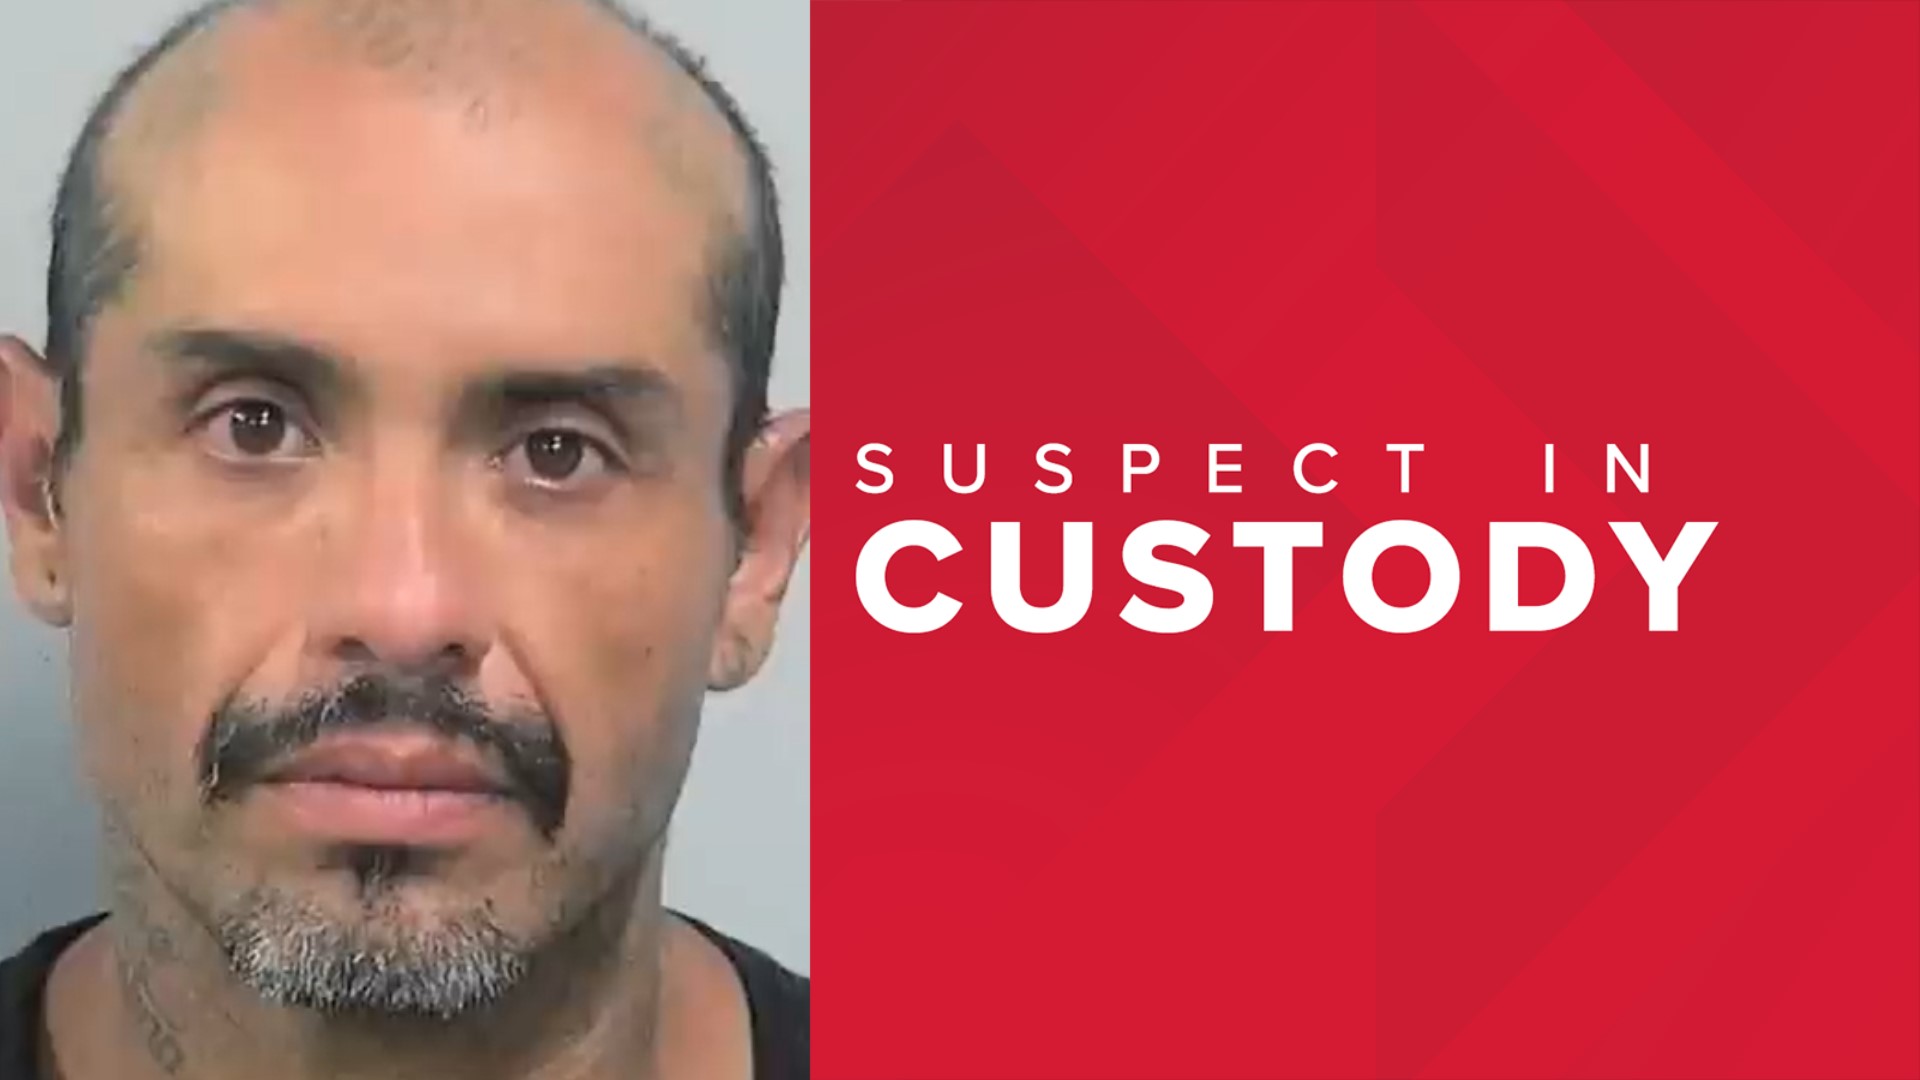 The FBI confirmed Raine Gonzales was safely located on Dec. 19 with the assistance of the Mexican government. The man accused of abducting her is in custody.